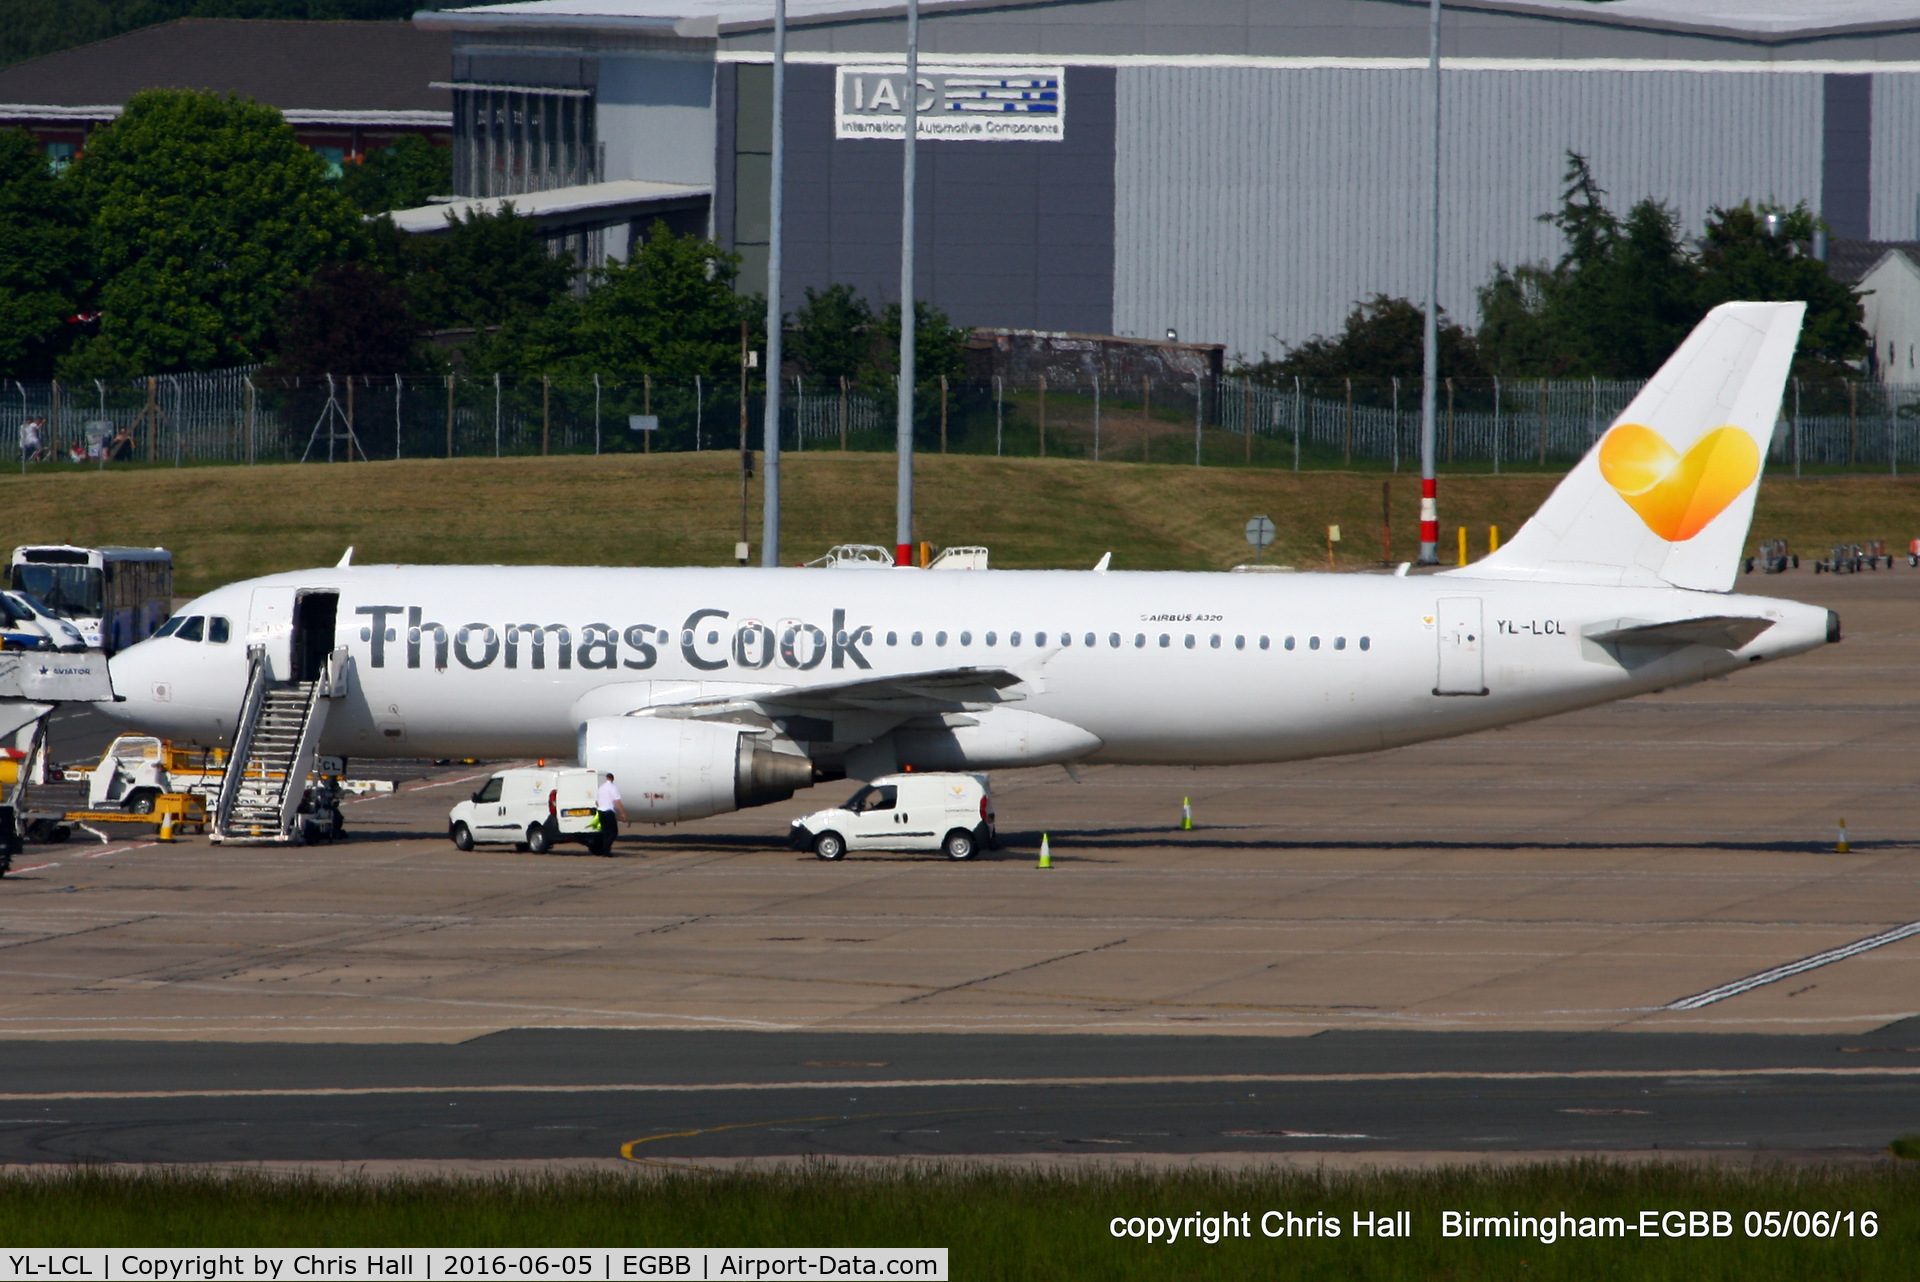 YL-LCL, 1995 Airbus A320-214 C/N 533, SmartLynx operating for Thomas Cook